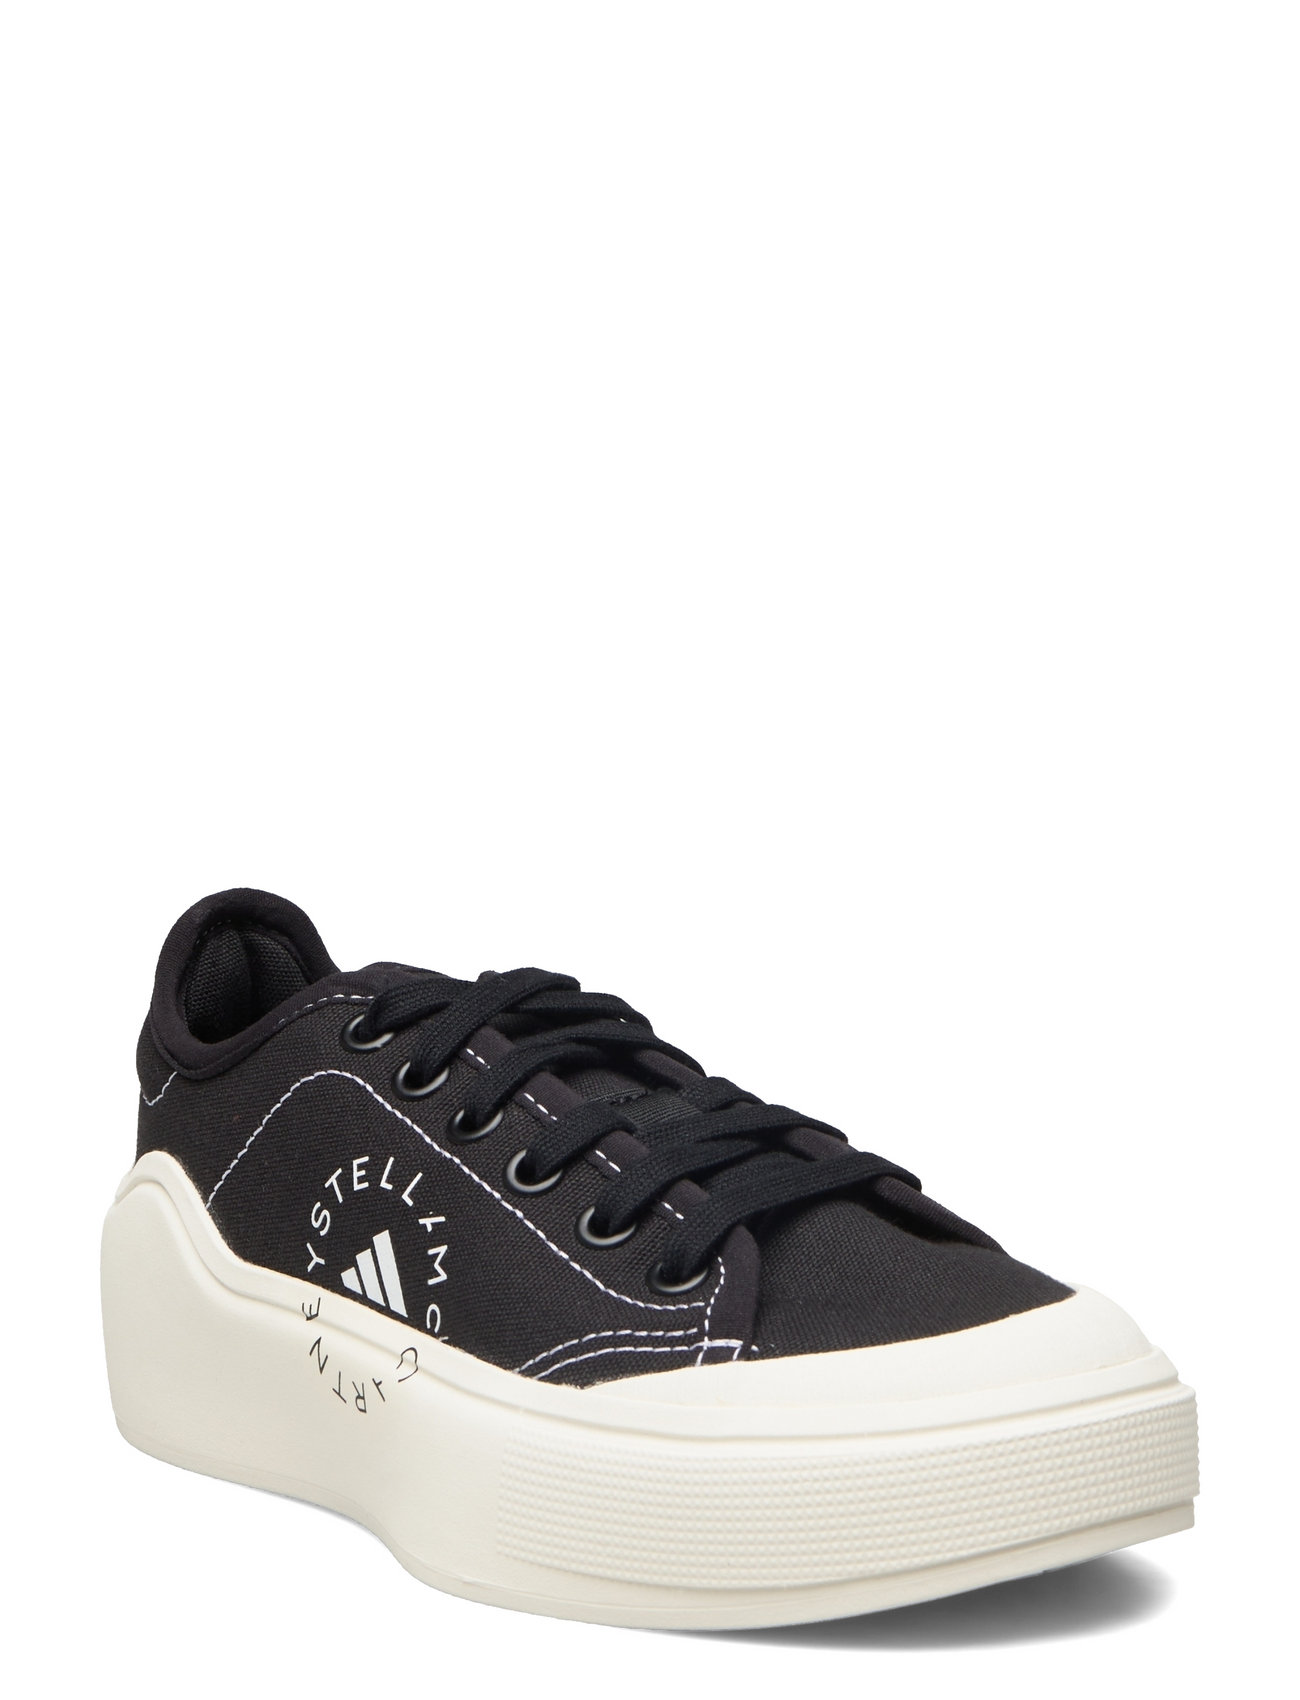 "adidas by Stella McCartney" "Asmc Court Cotton Sport Sneakers Low-top Black Adidas By